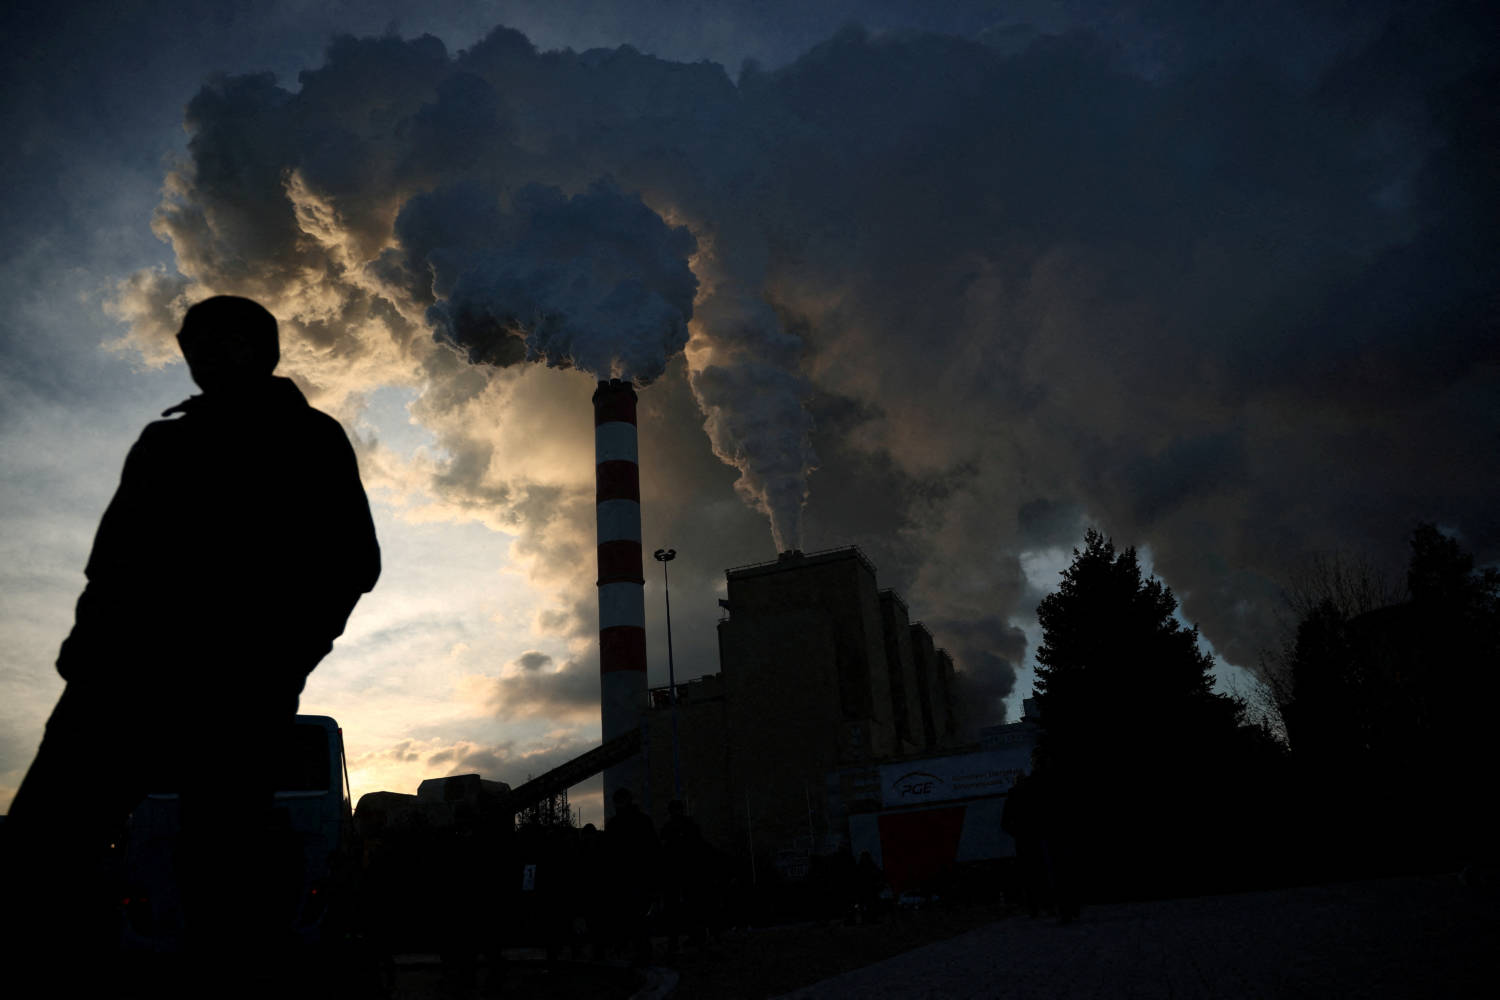 File Photo: A Man Walks As Smoke And Steam Billow From Belchatow Power Station, Europe's Largest Coal Fired Power Plant Powered By Lignite, Operated By Polish Utility Pge, In Rogowiec